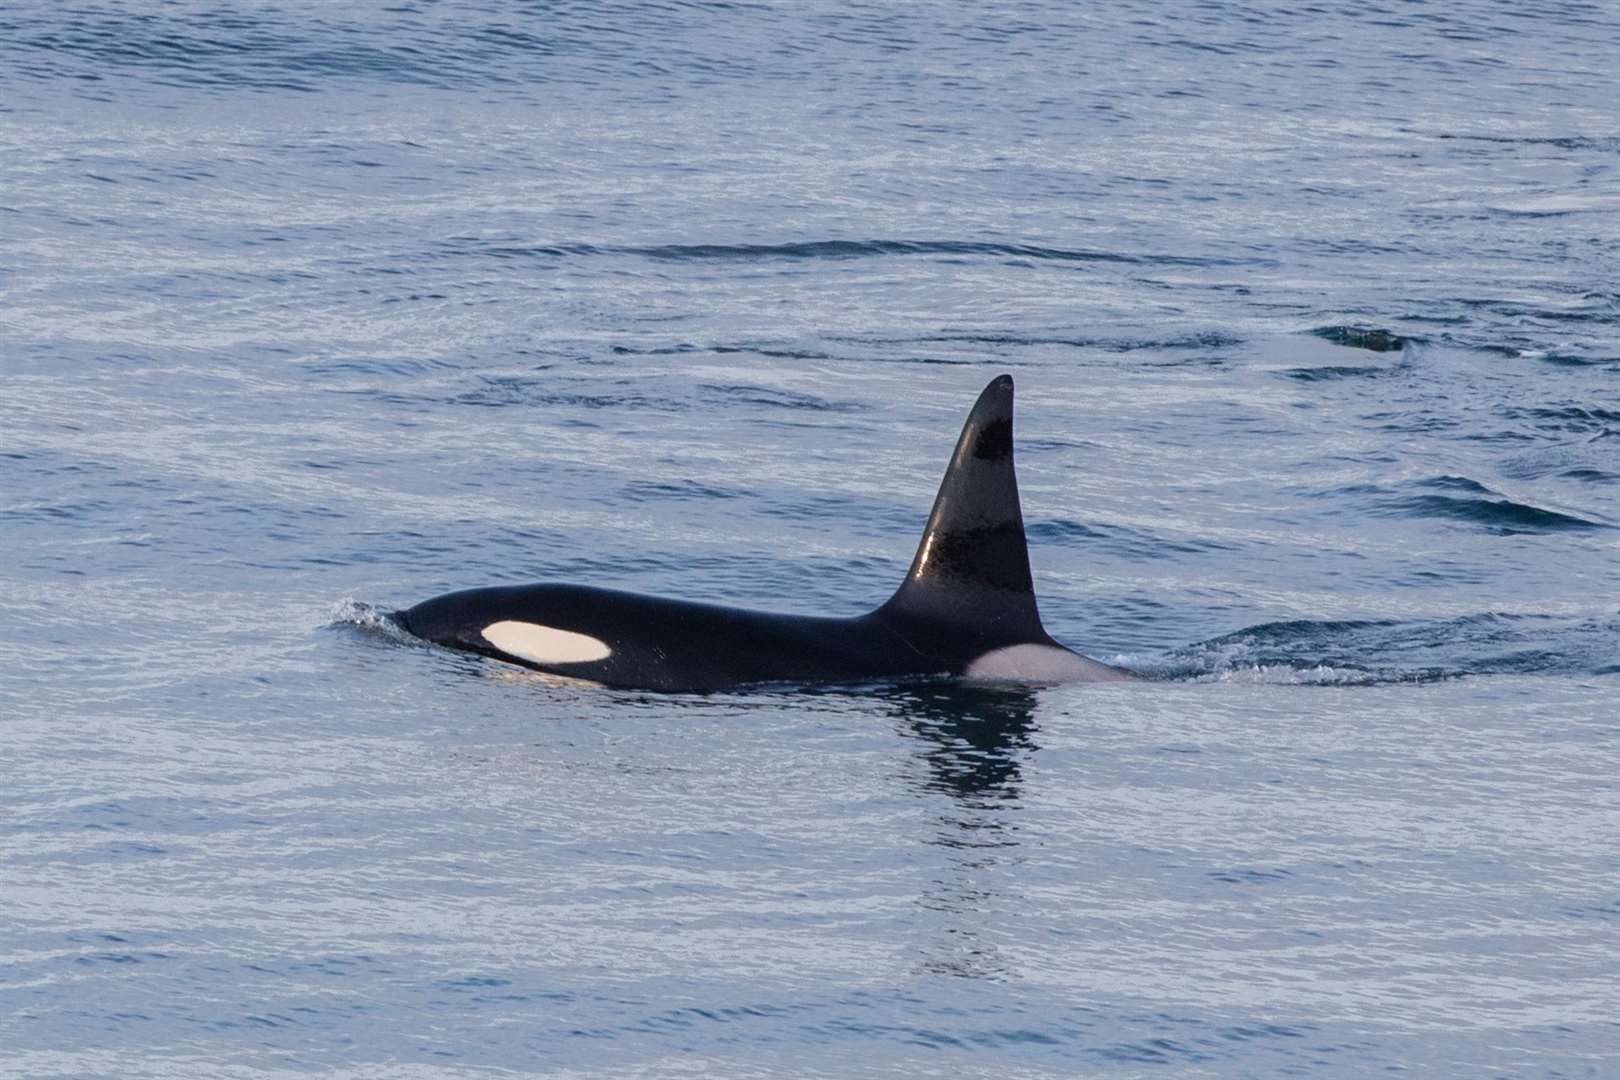 The male orca known as 72 going past Karen's house on Monday evening. Picture: Karen Munro